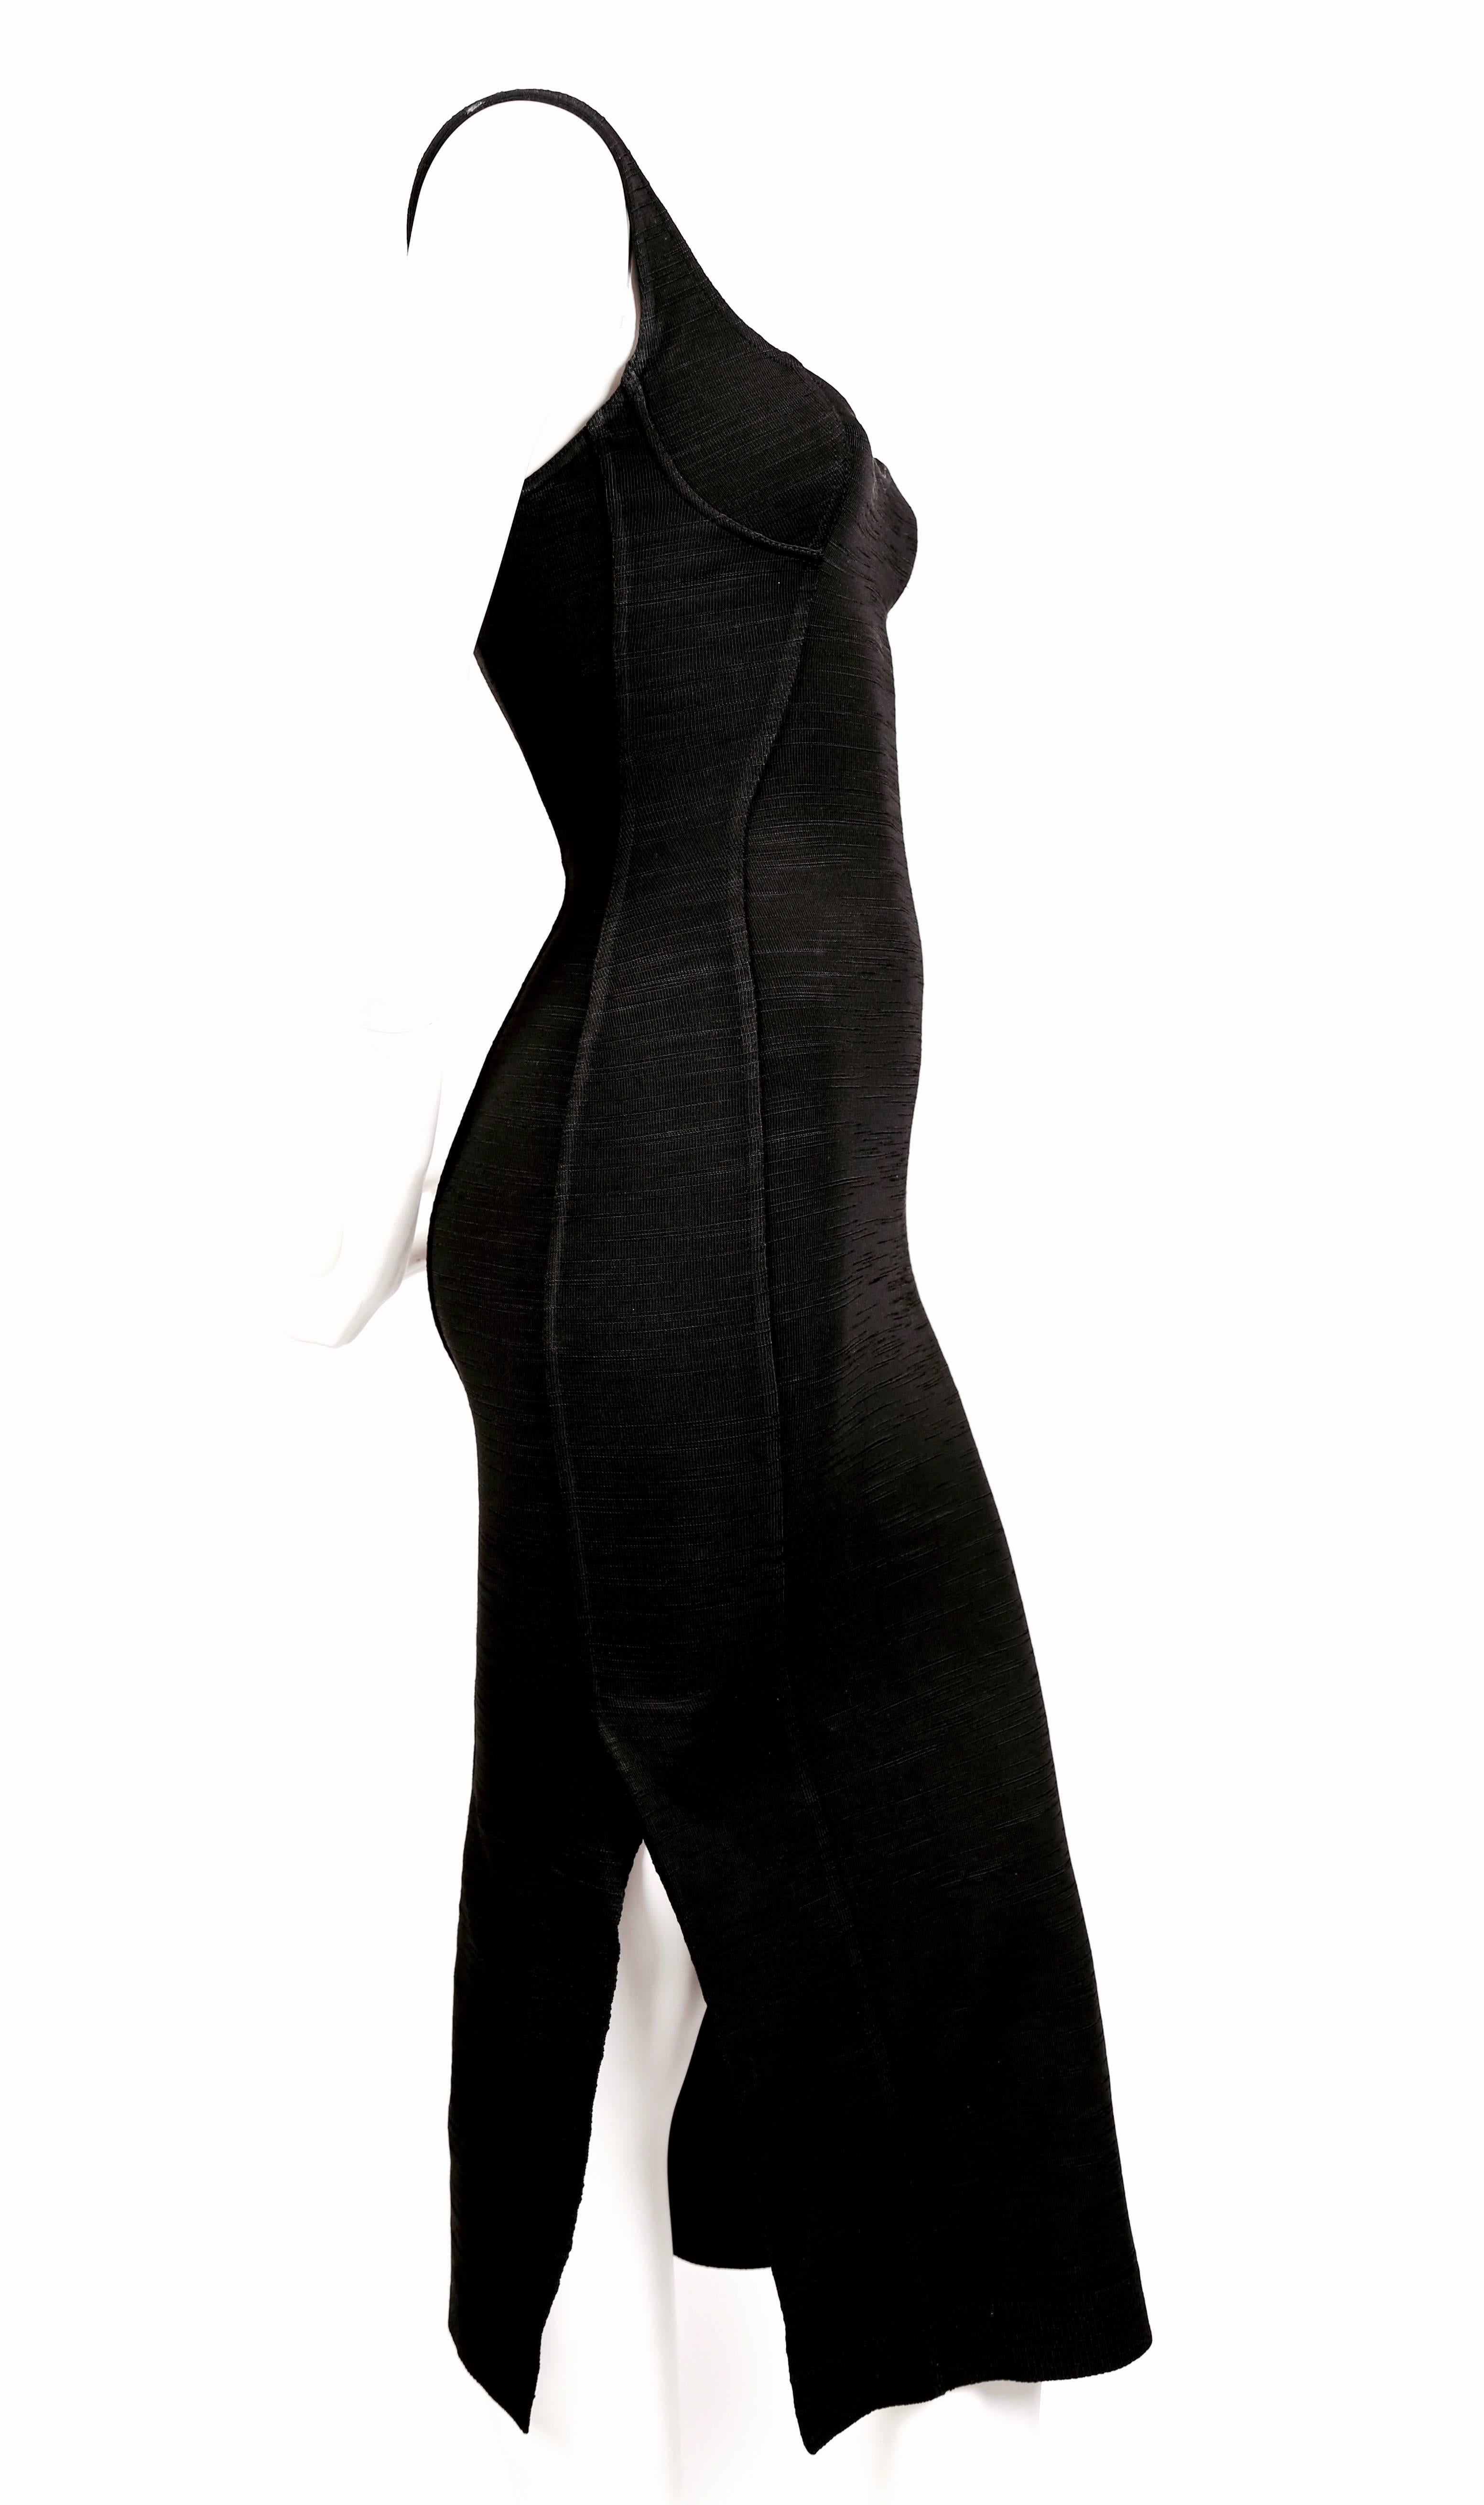 Very rare black long dress with bustier seams and unique vents at sides and back designed by Azzedine Alaia exactly as seen on the spring 1991 runway. Very unique woven textured knit. Labeled a size XS. Best fits a small XS. Approximate measurements